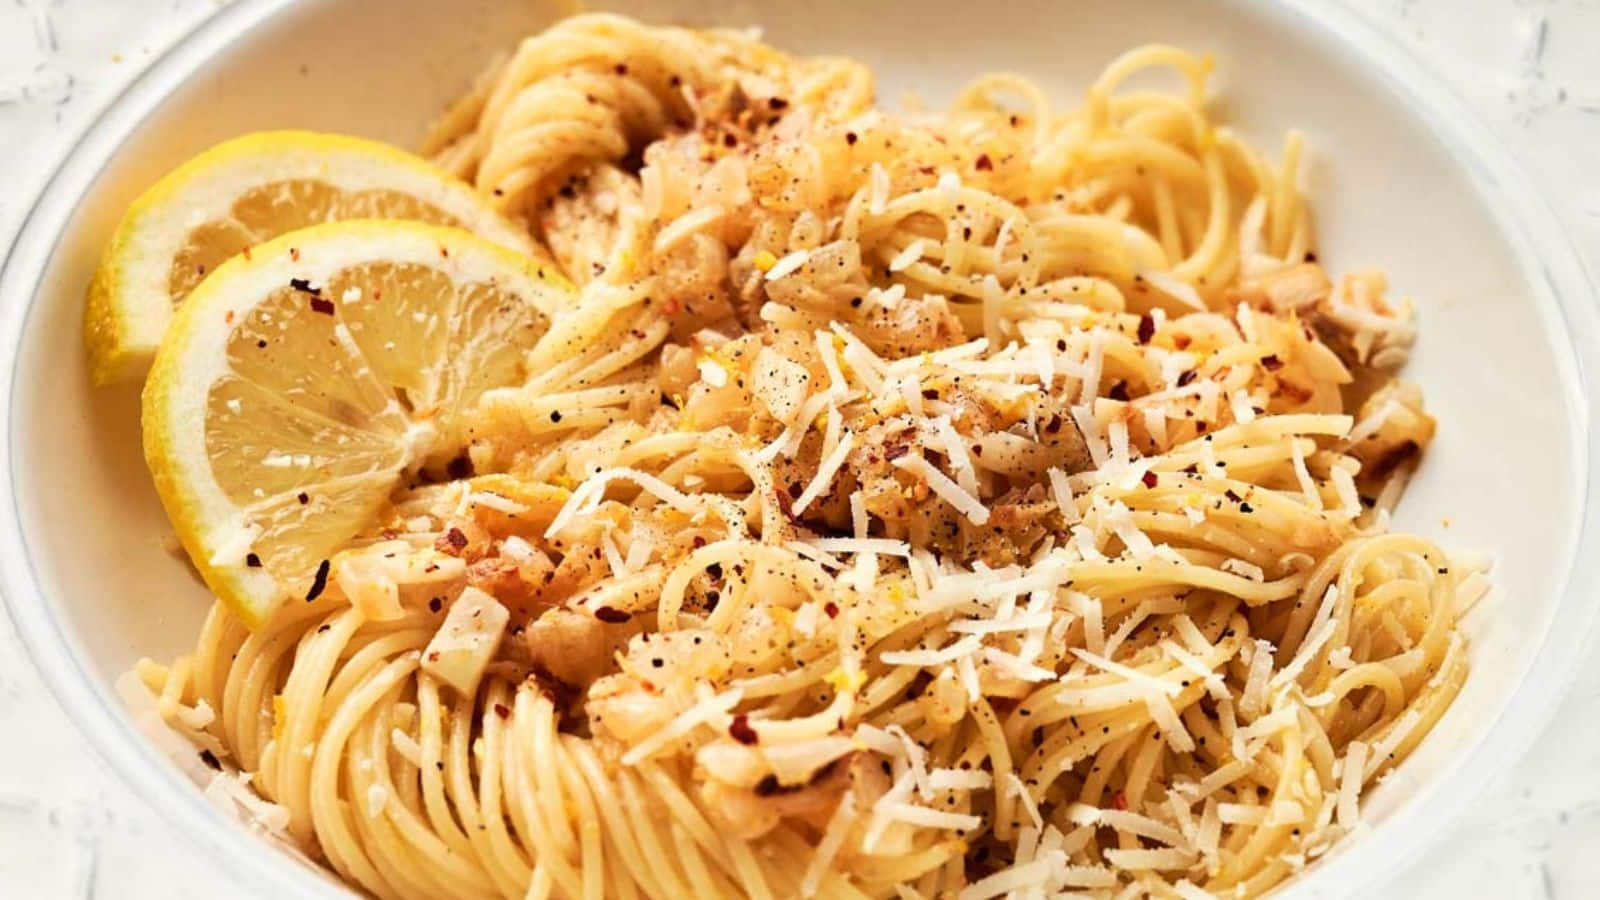 A bowl of pasta with lemon slices and parmesan cheese.